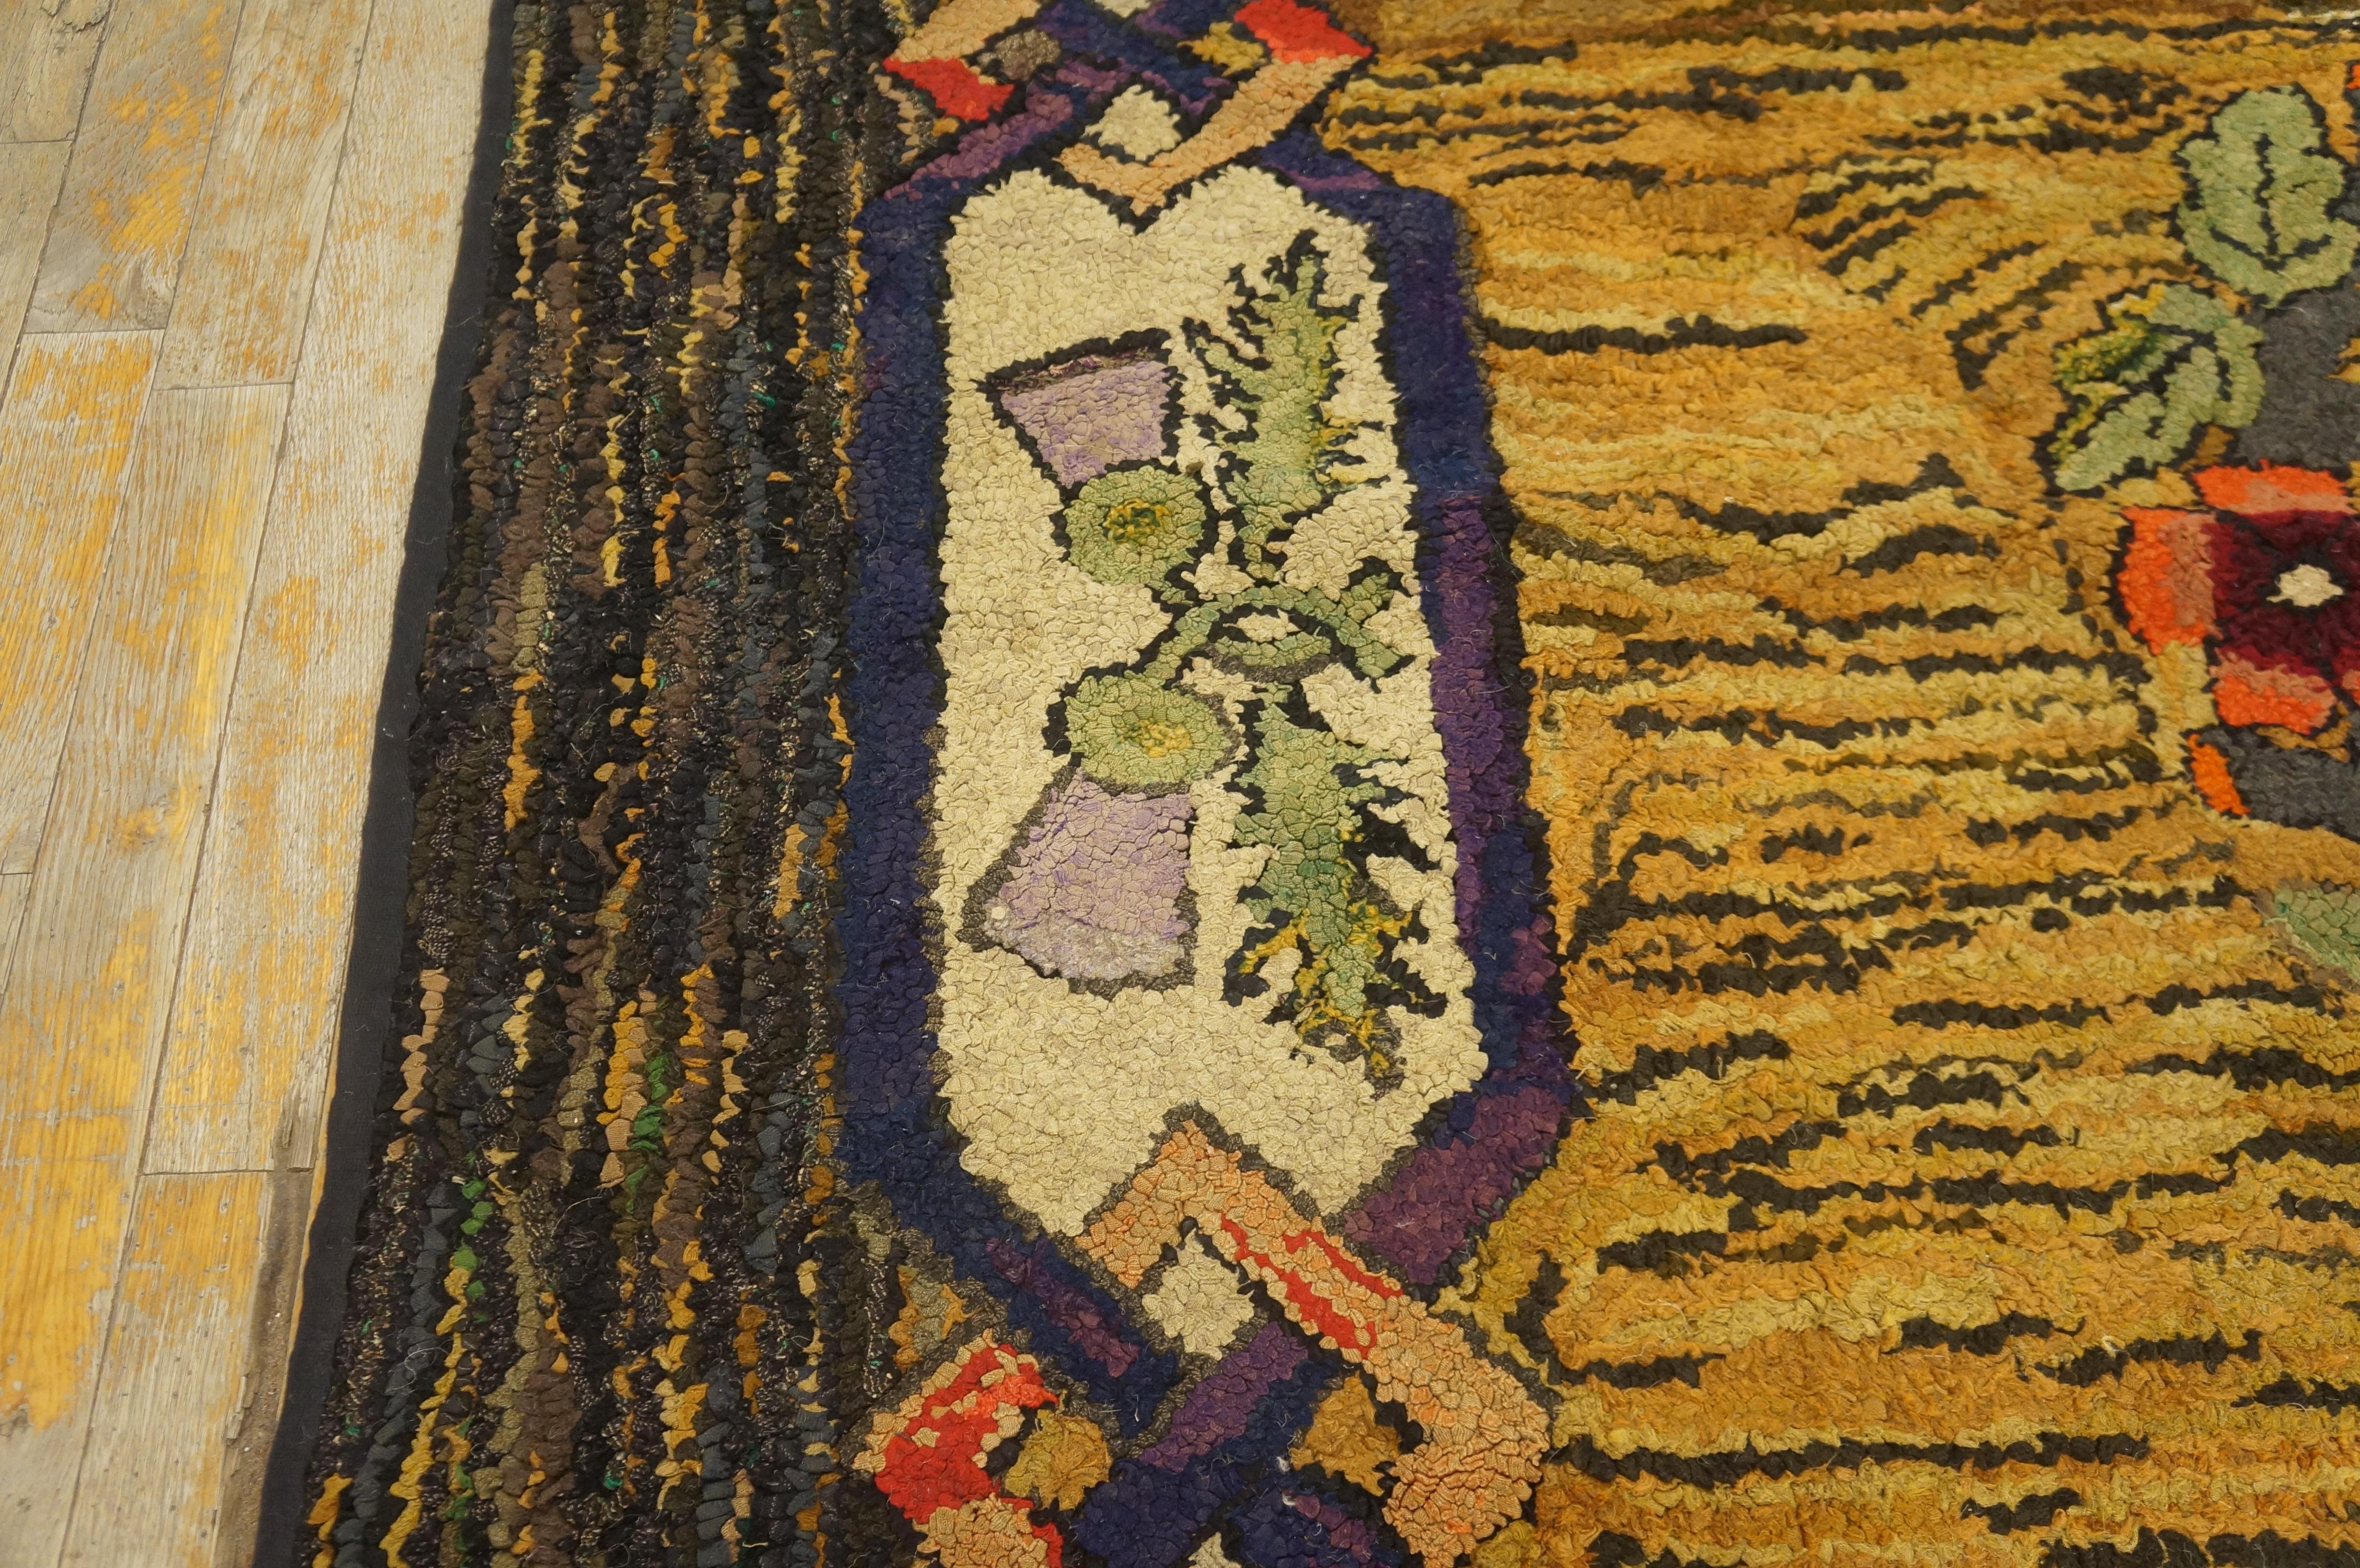 Early 20th Century American Hooked Rug ( 6' x 6' - 183 x 183 ) In Good Condition For Sale In New York, NY